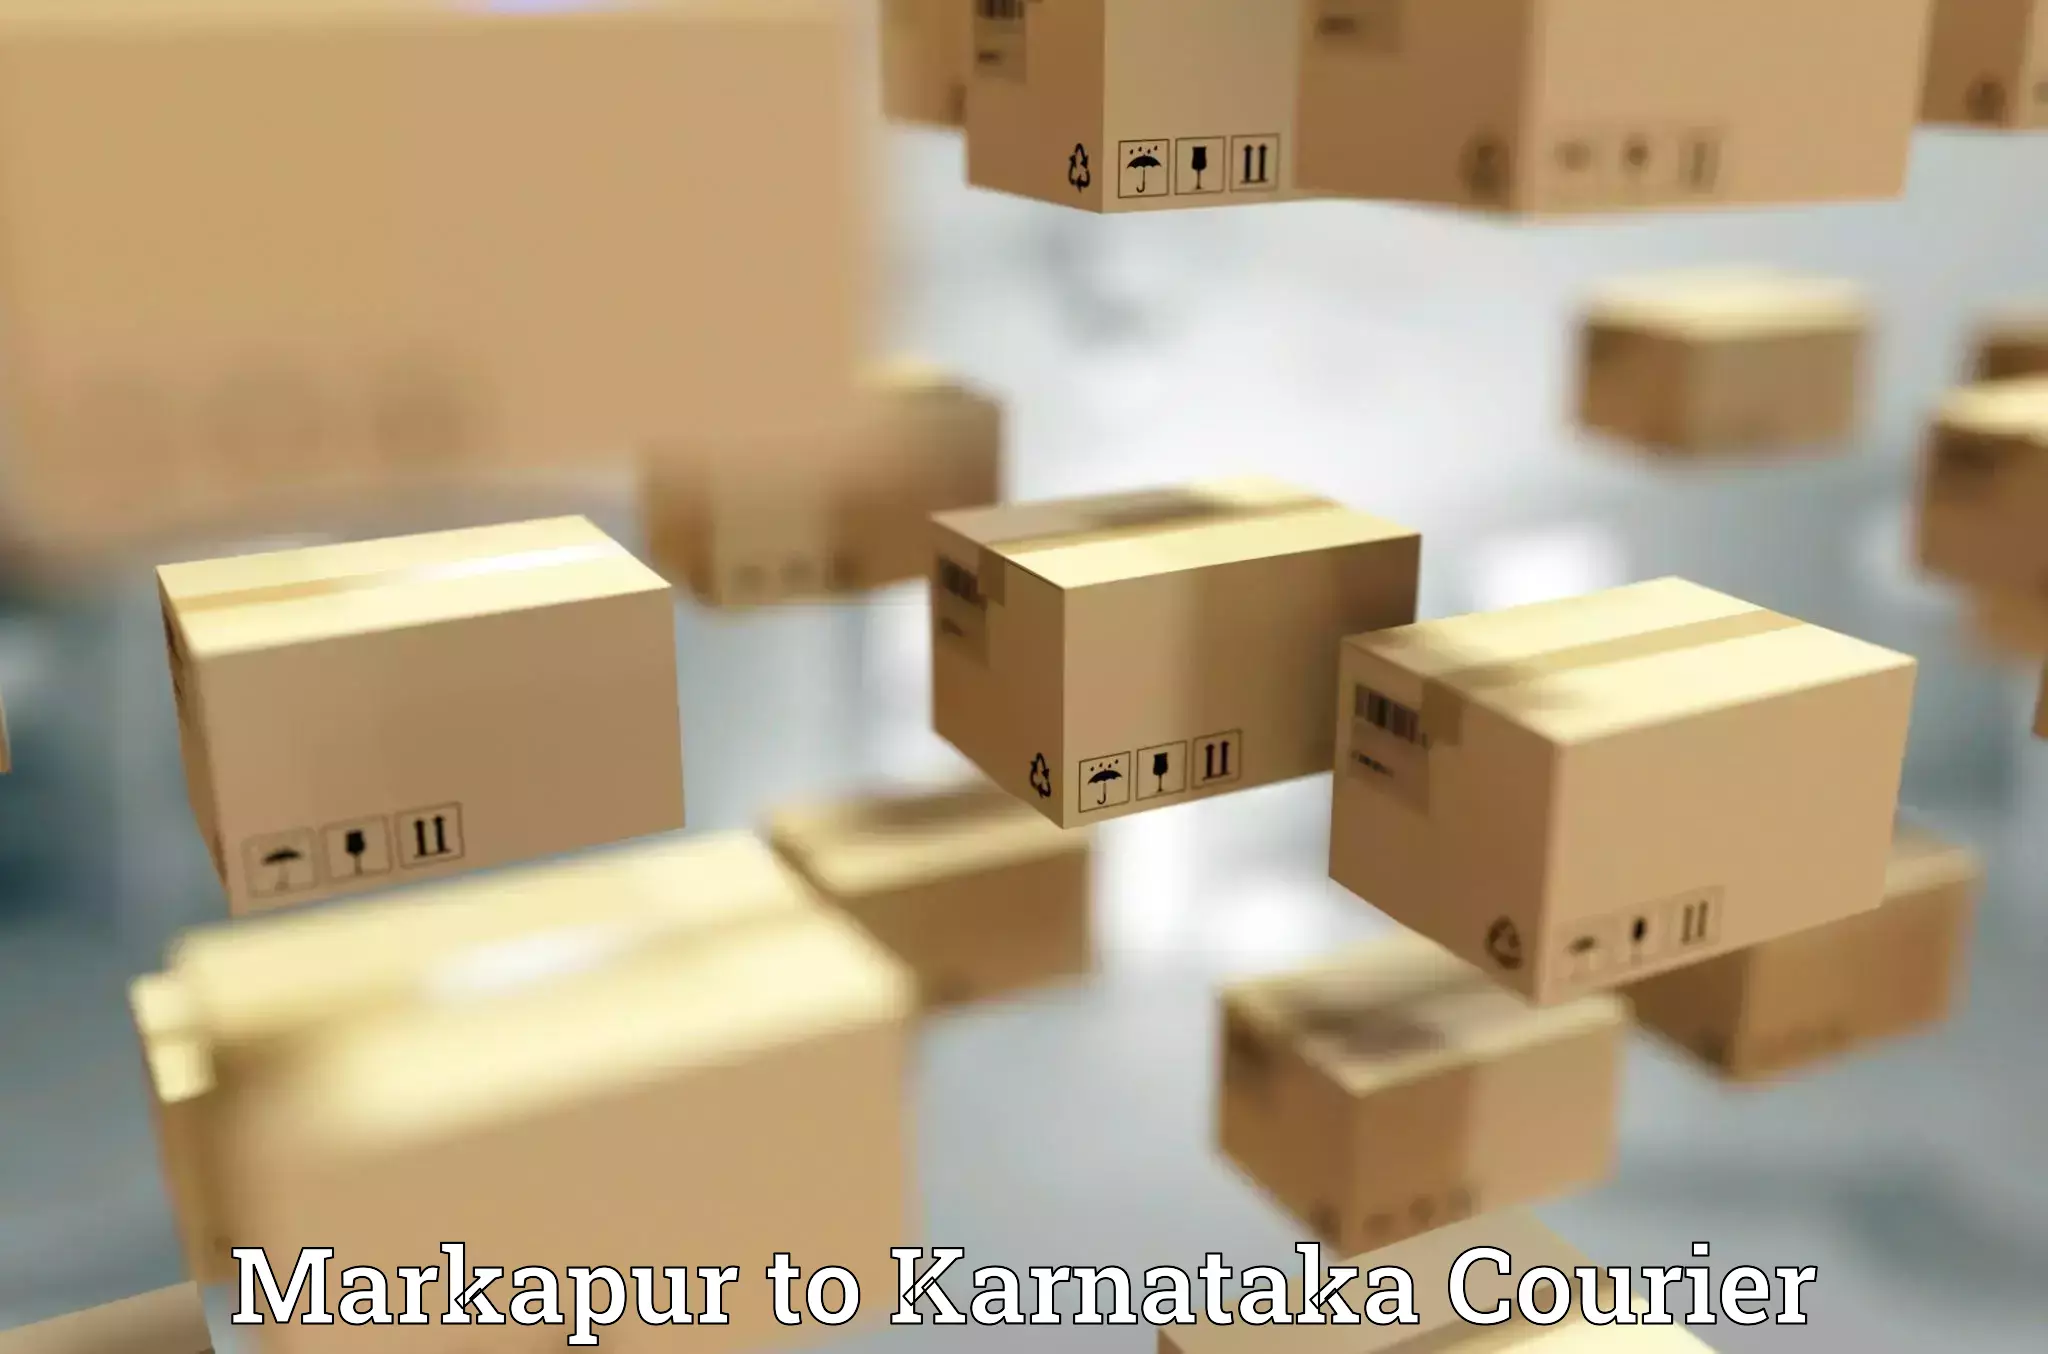 On-call courier service Markapur to Dabaspet